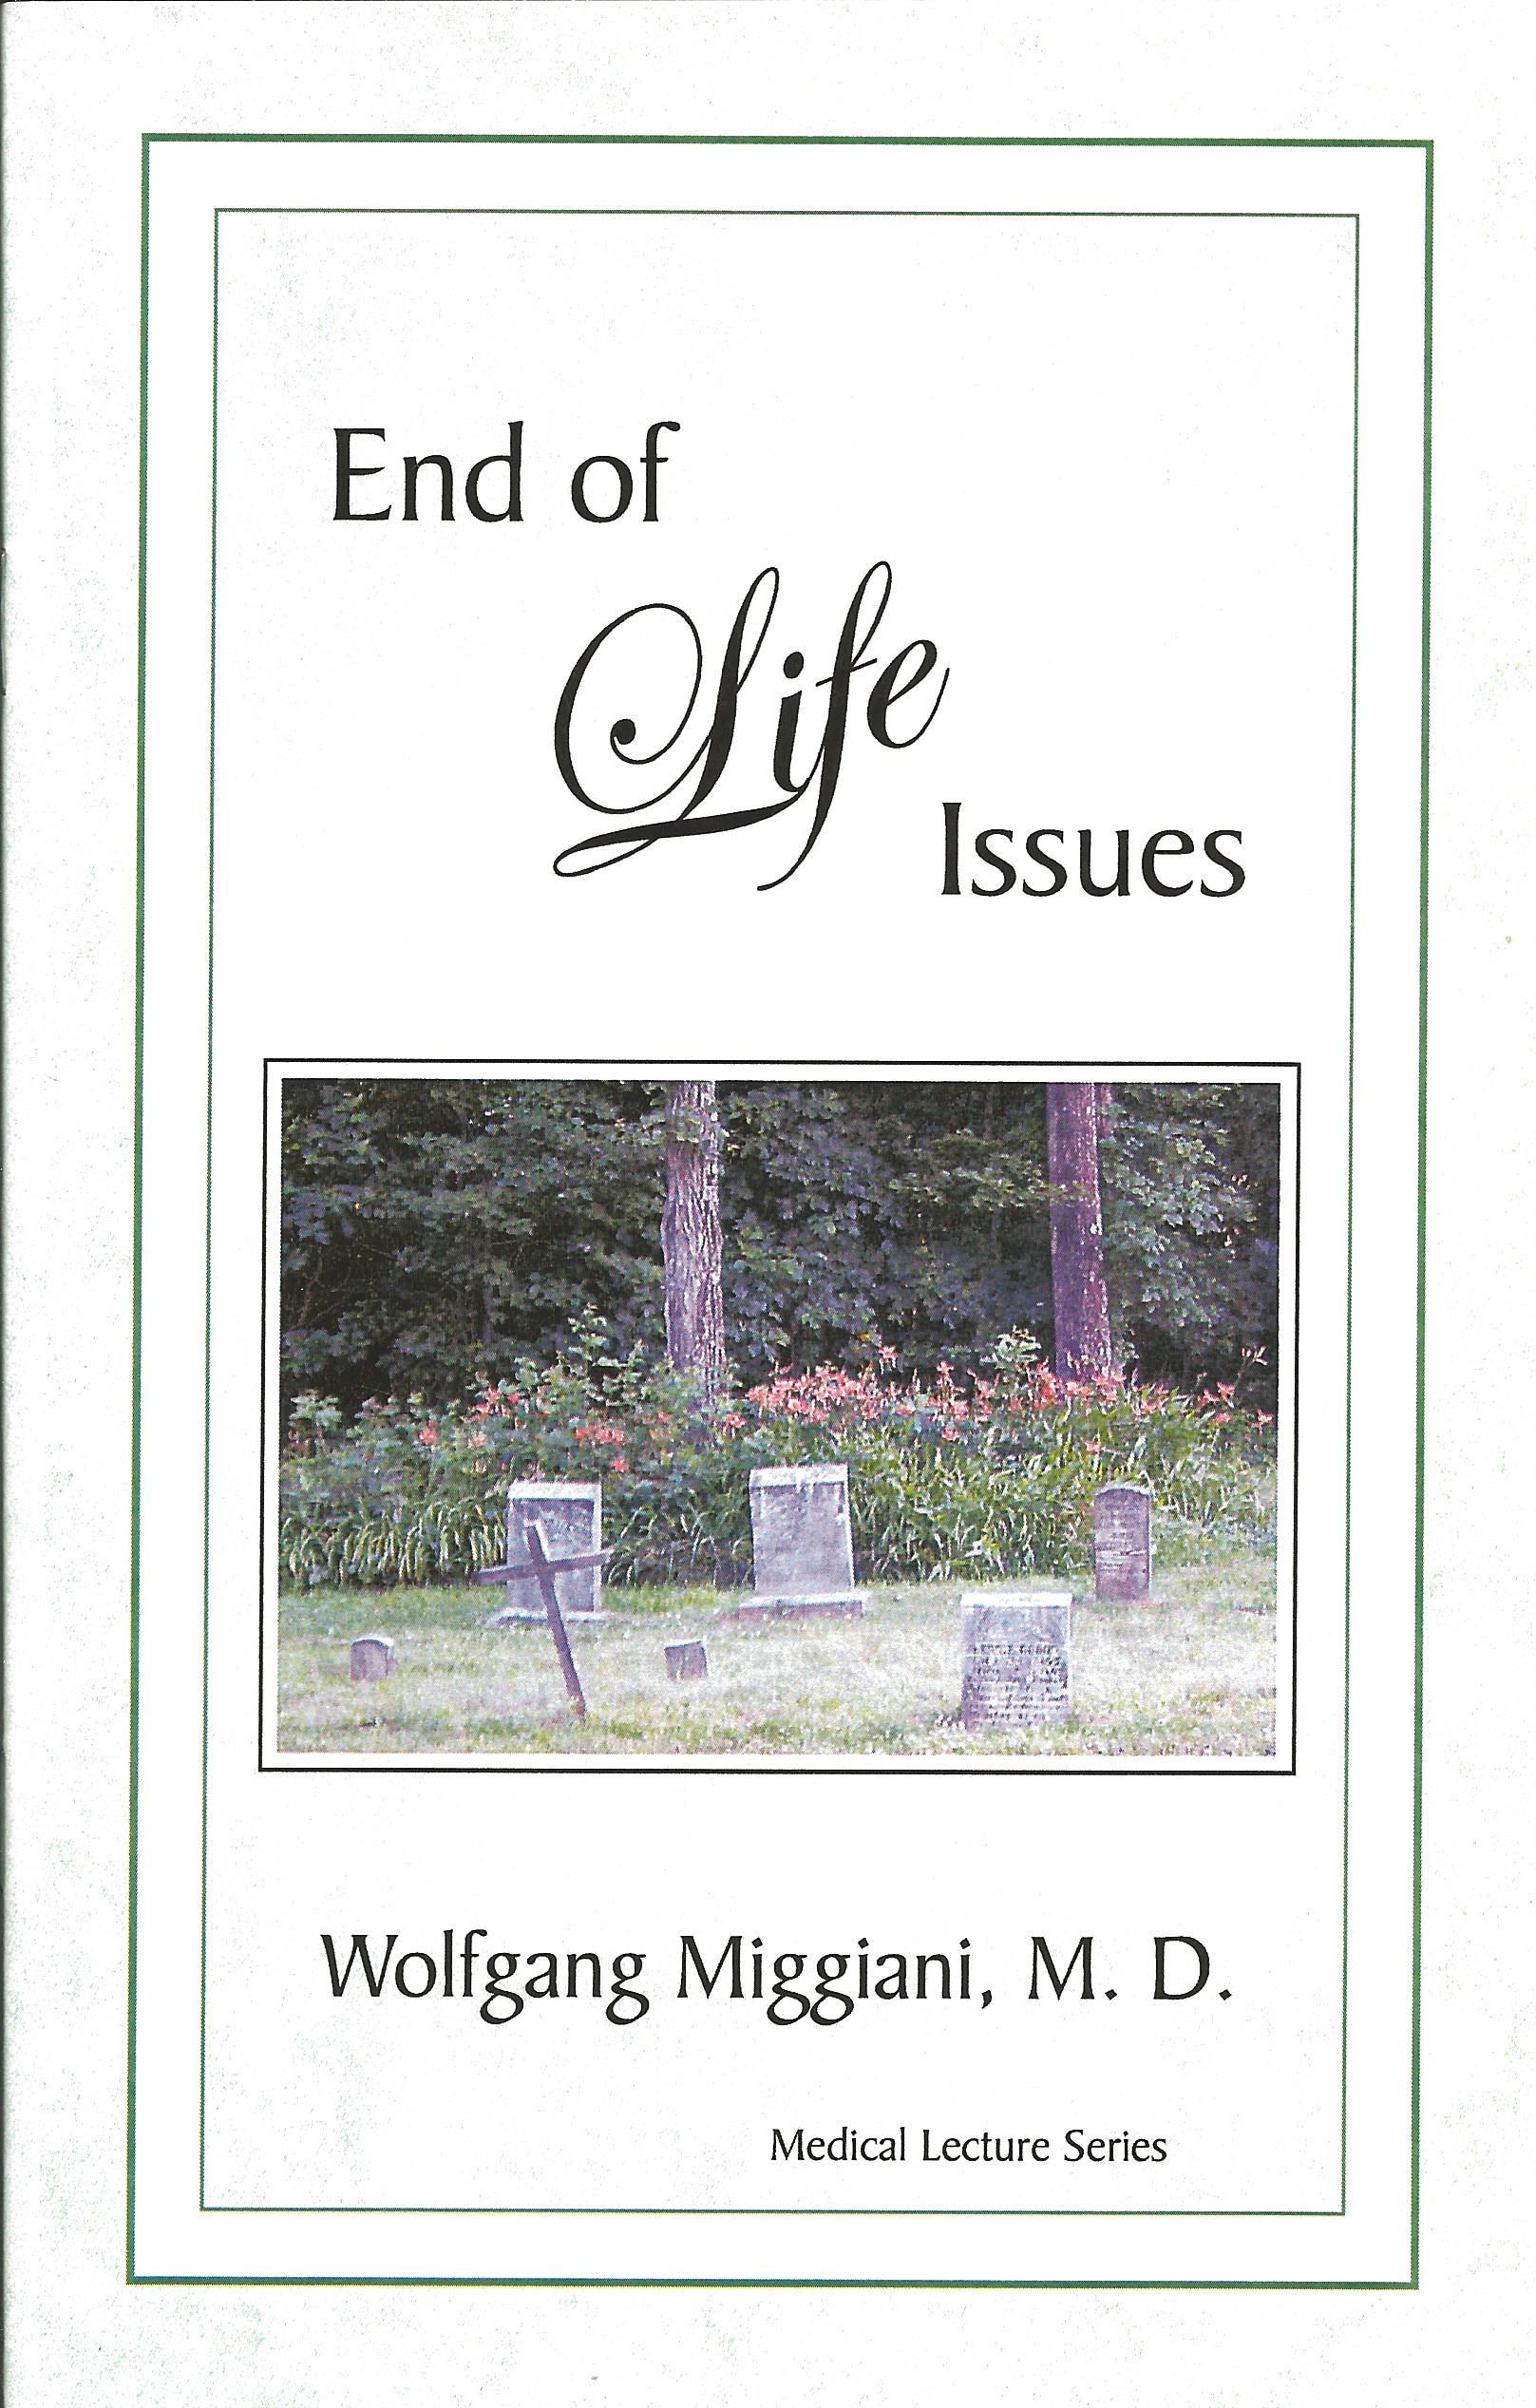 END OF LIFE ISSUES Wolfgang Miggiani, M.D.